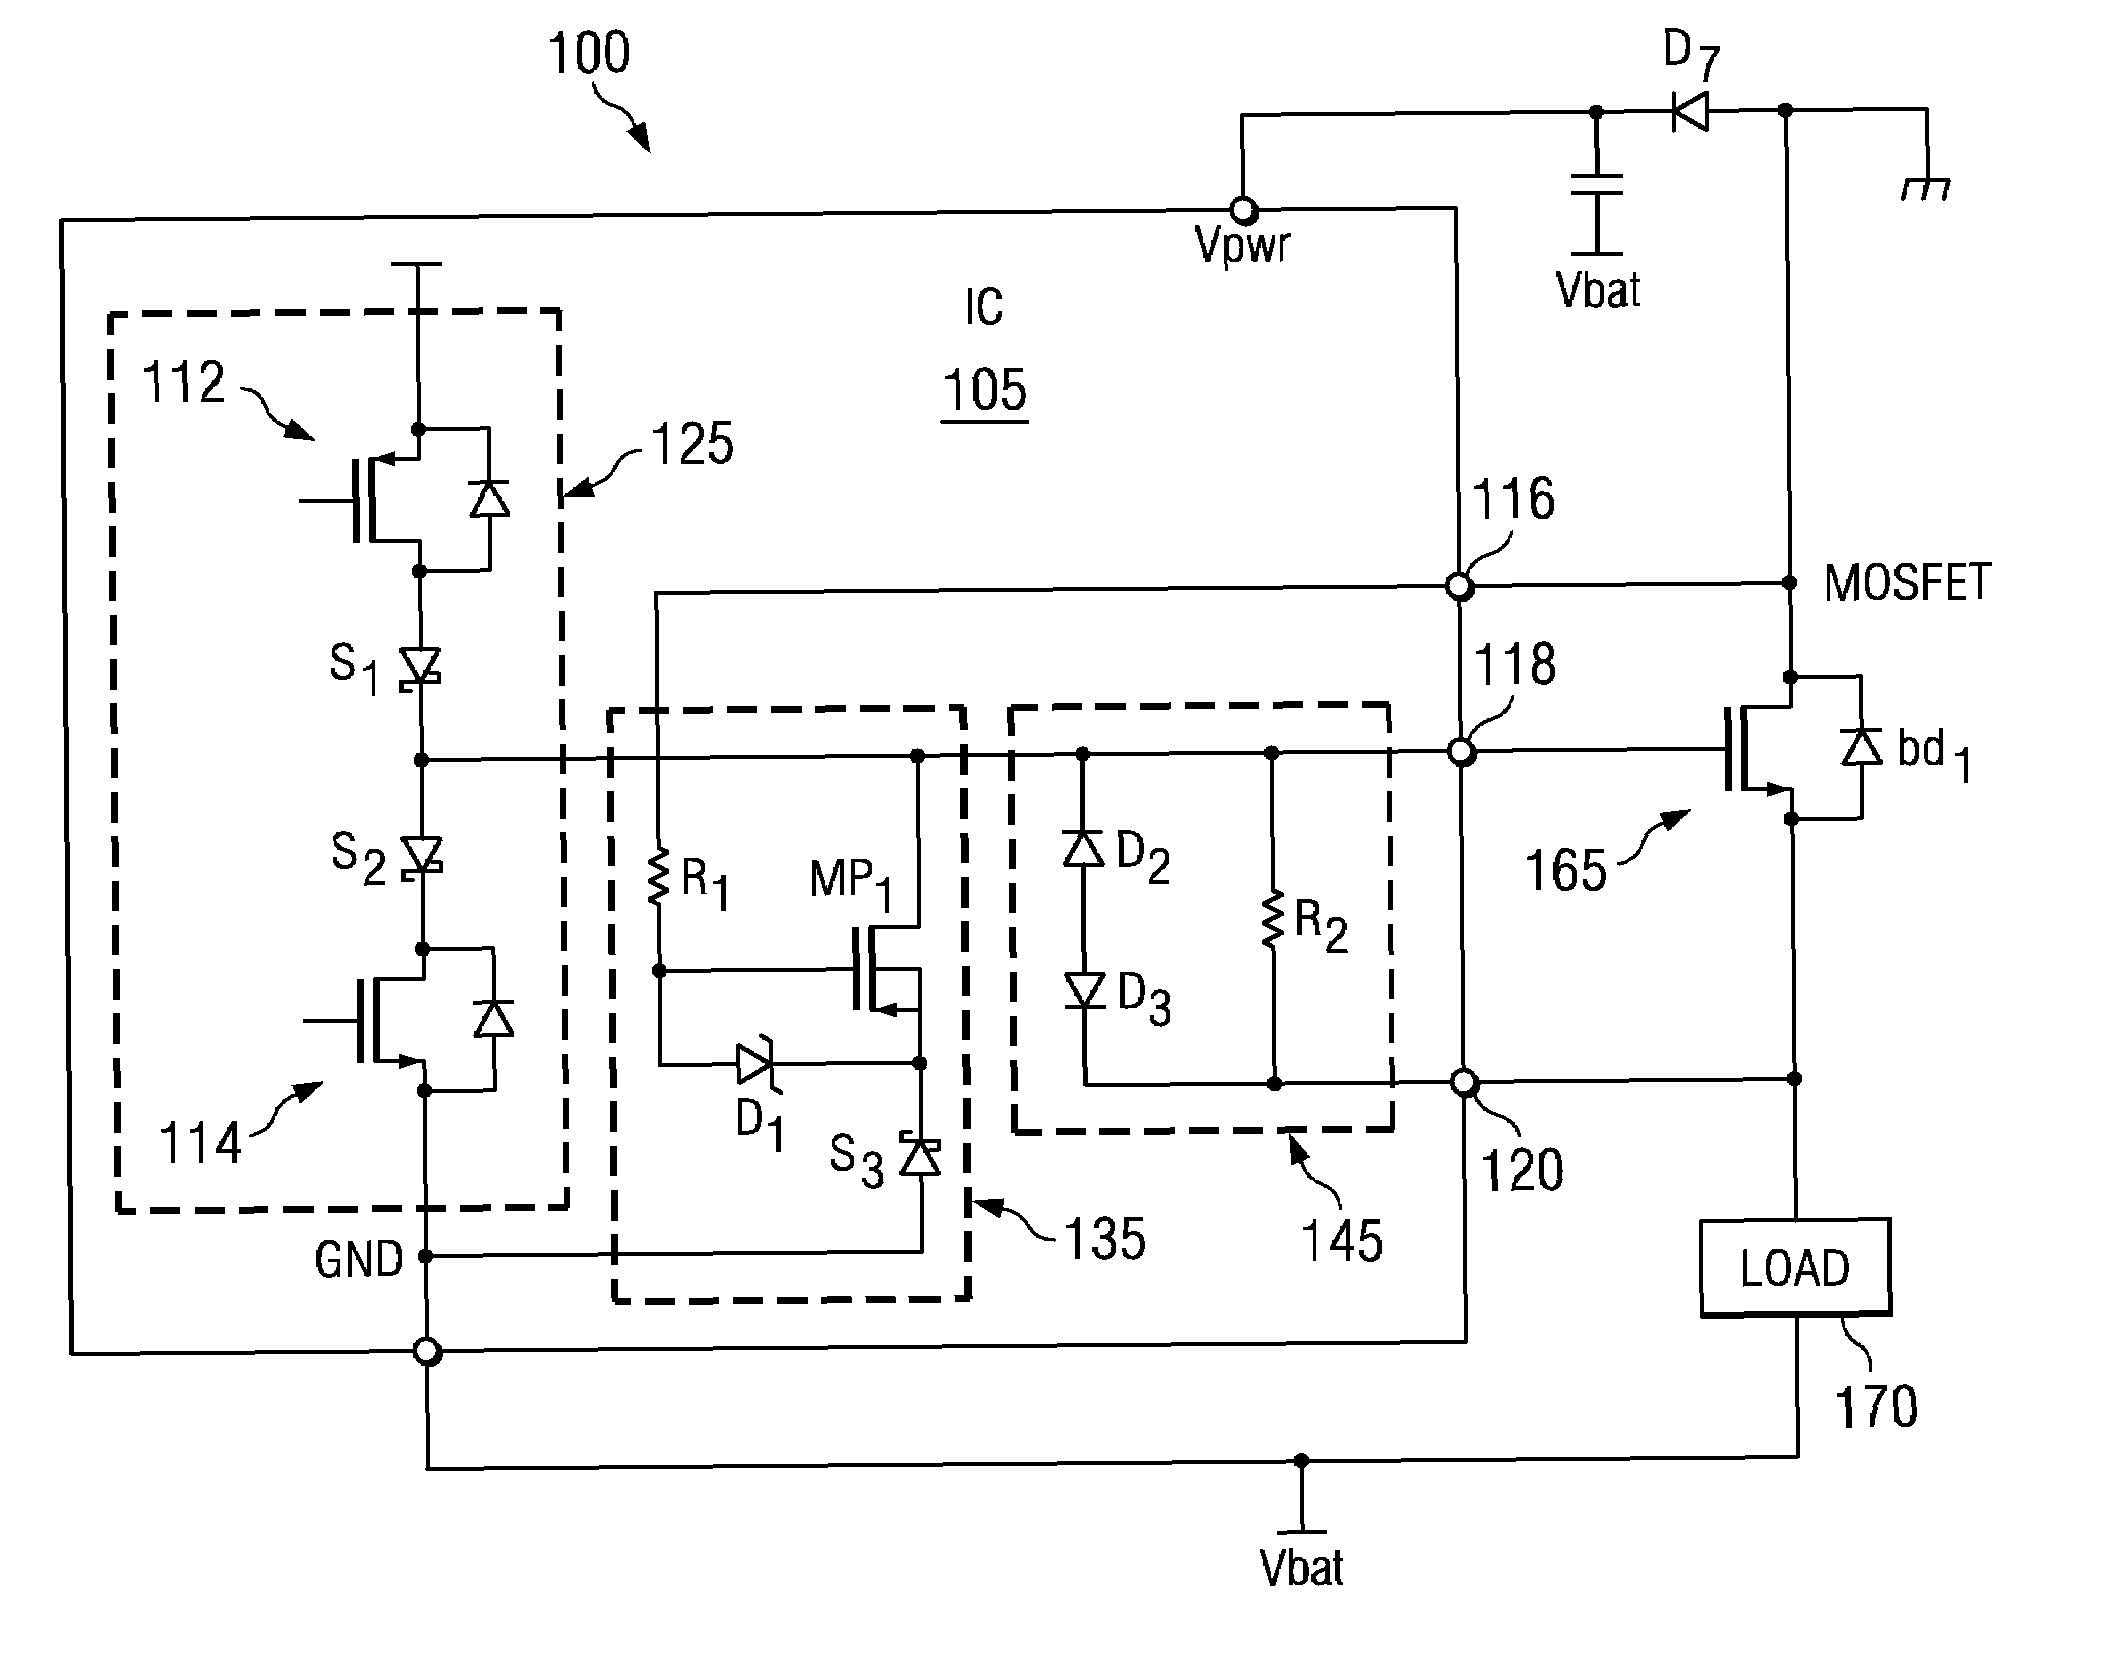 Integrated reverse battery protection circuit for an external MOSFET switch